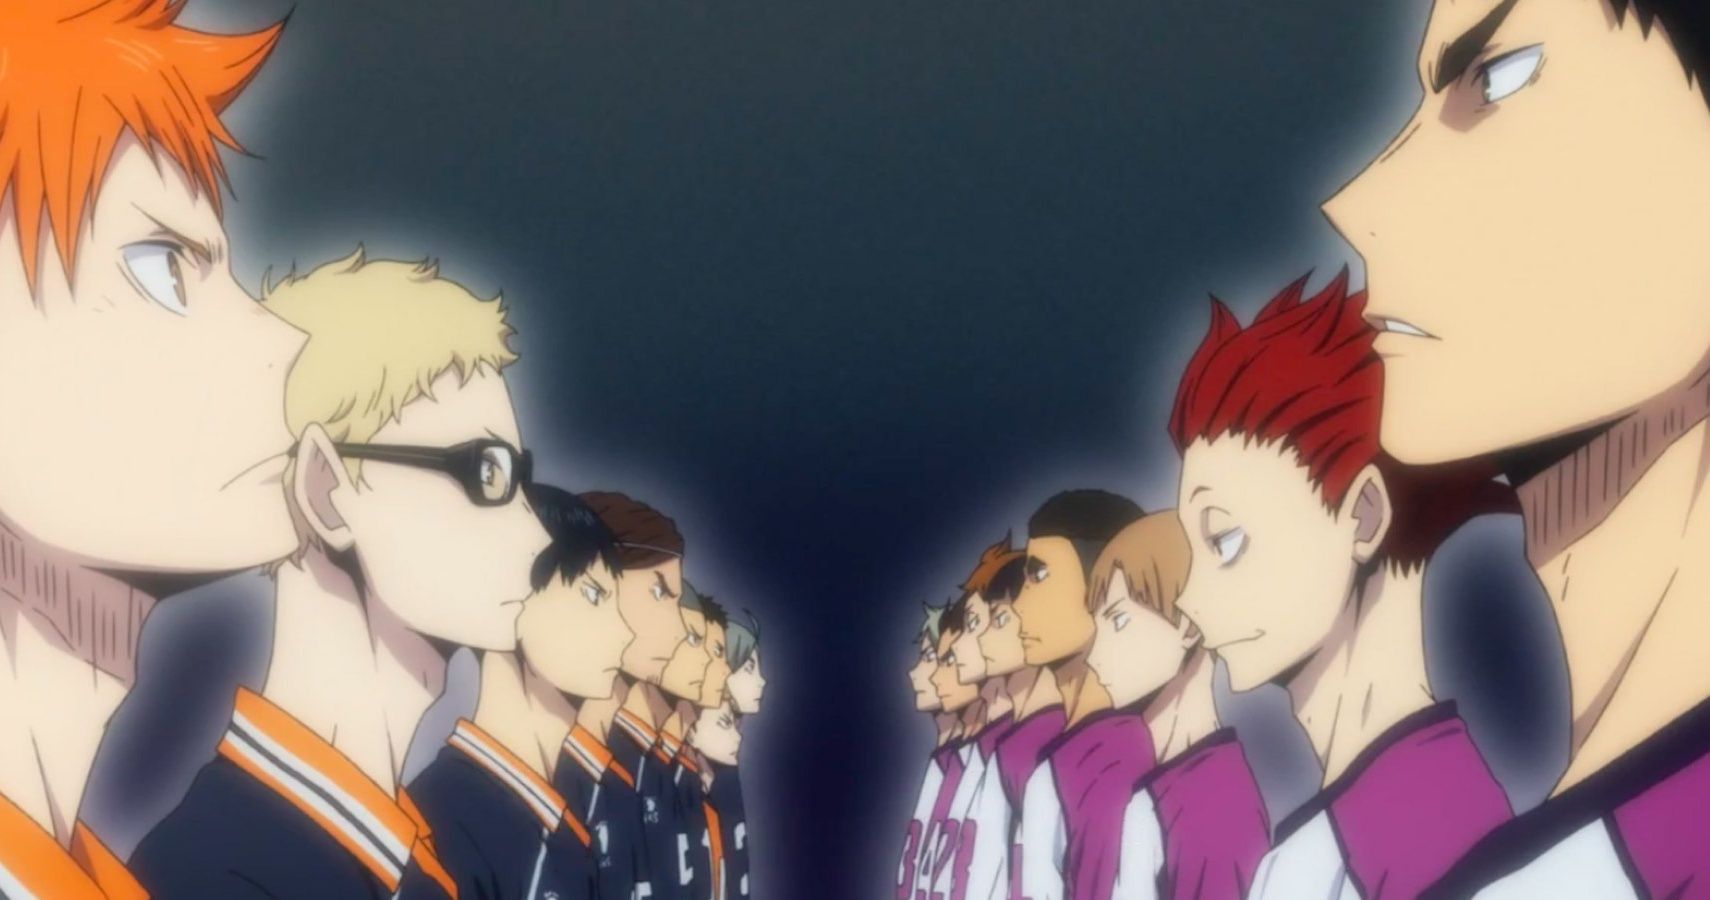 When Is Haikyuu Season 5 Coming Out? Answered